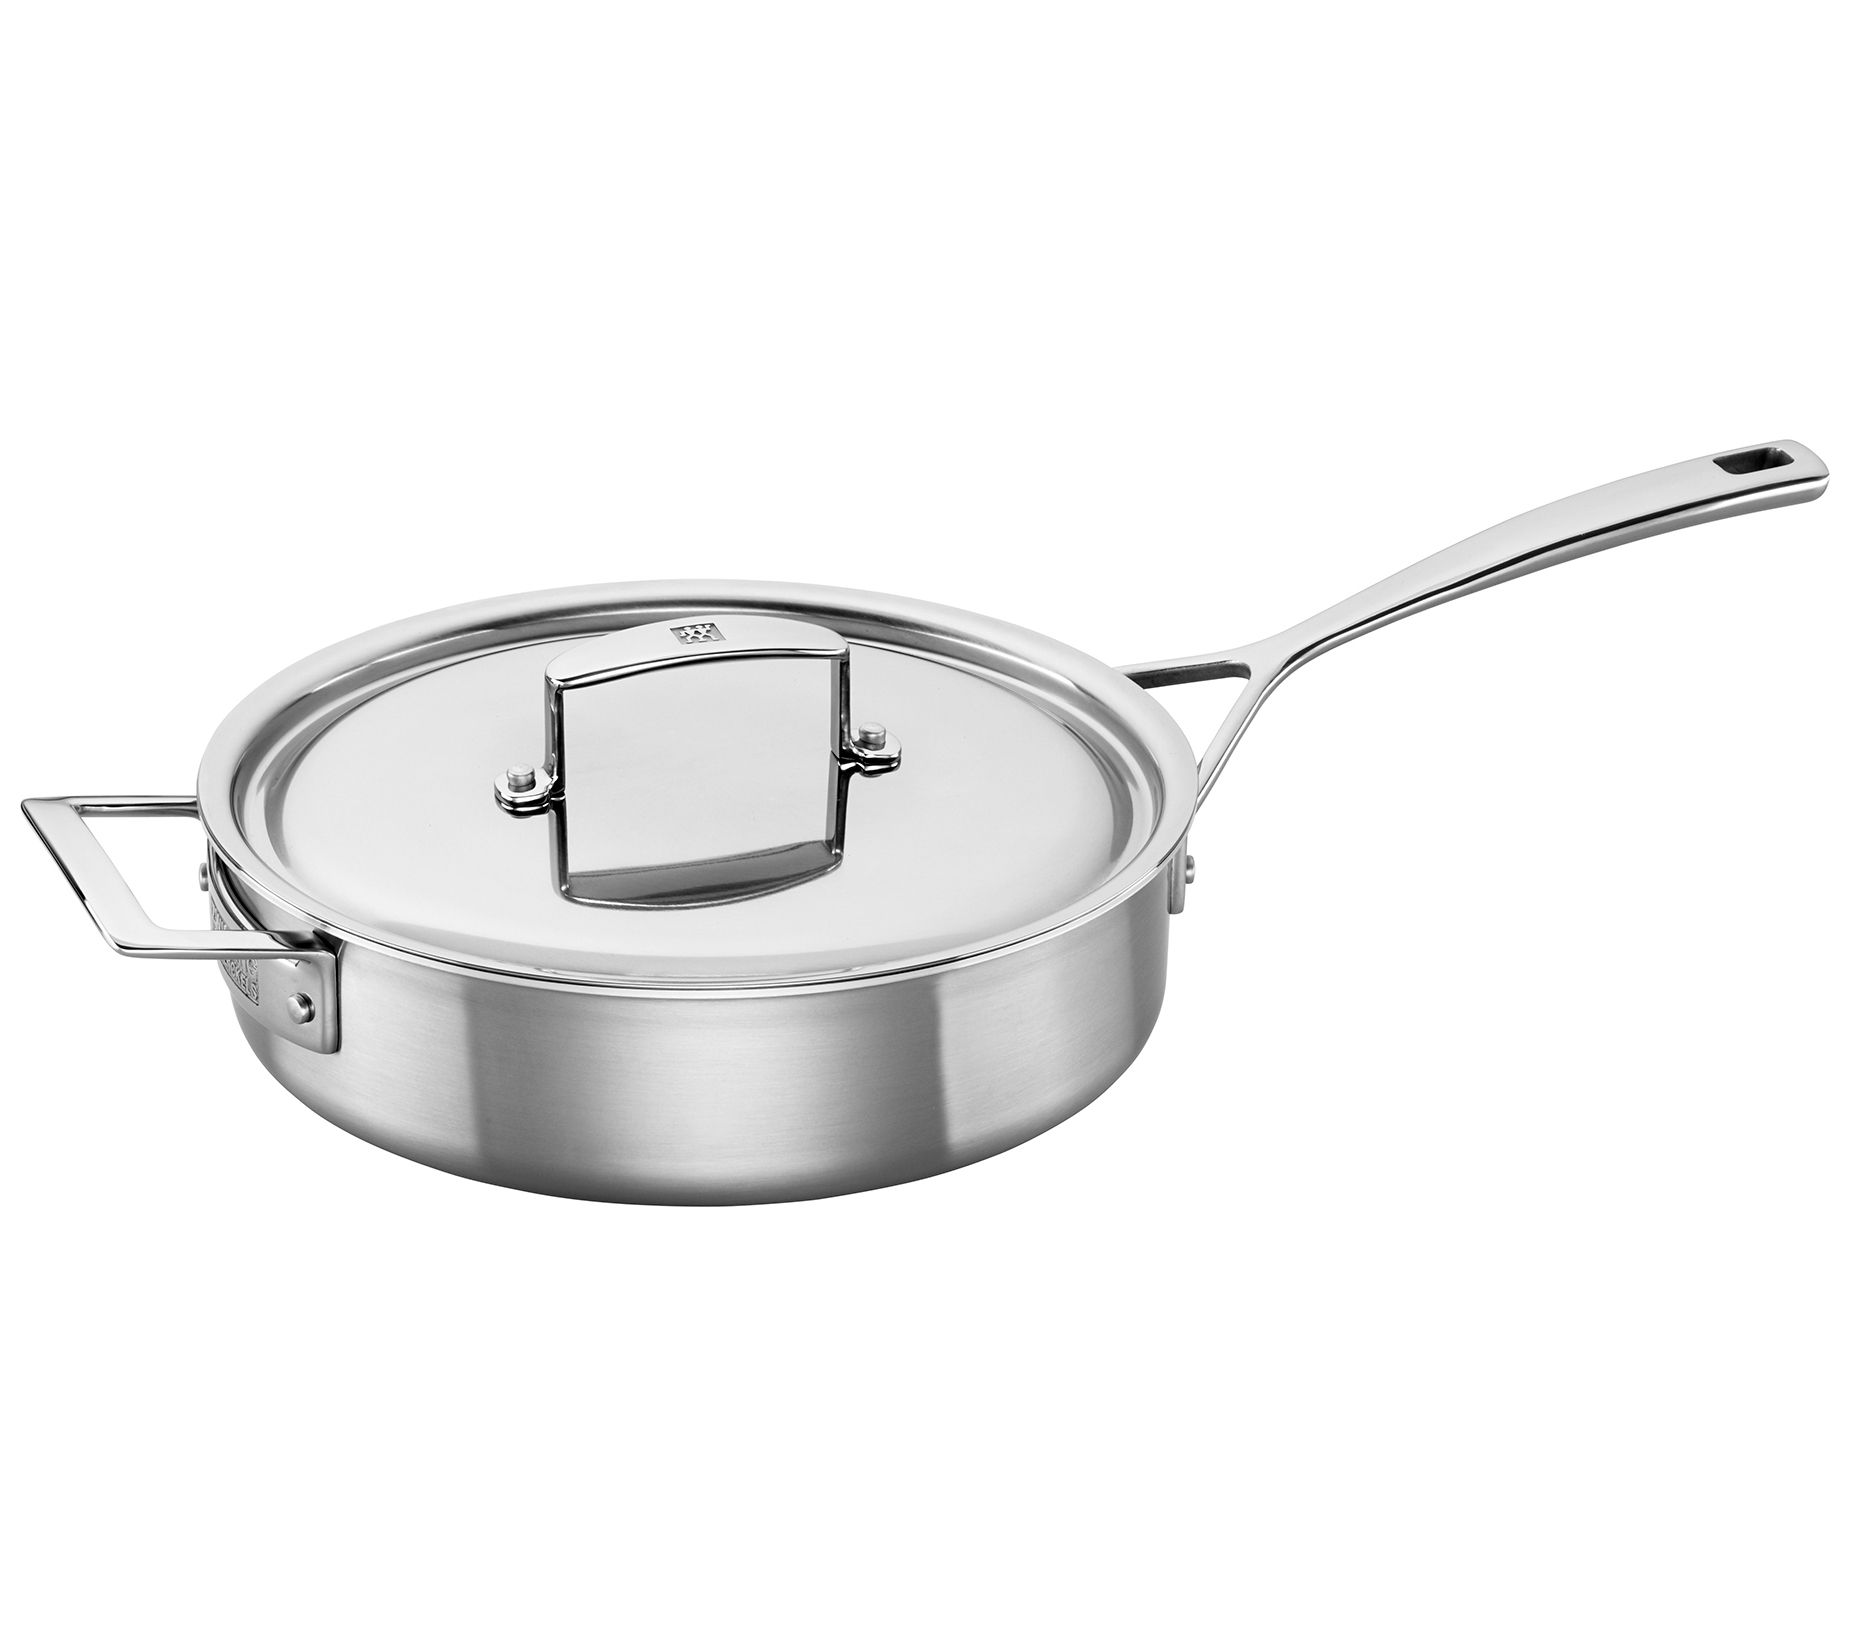 ZWILLING Aurora 5-Ply 3-qt Stainless Steel Saute Pan - QVC.com